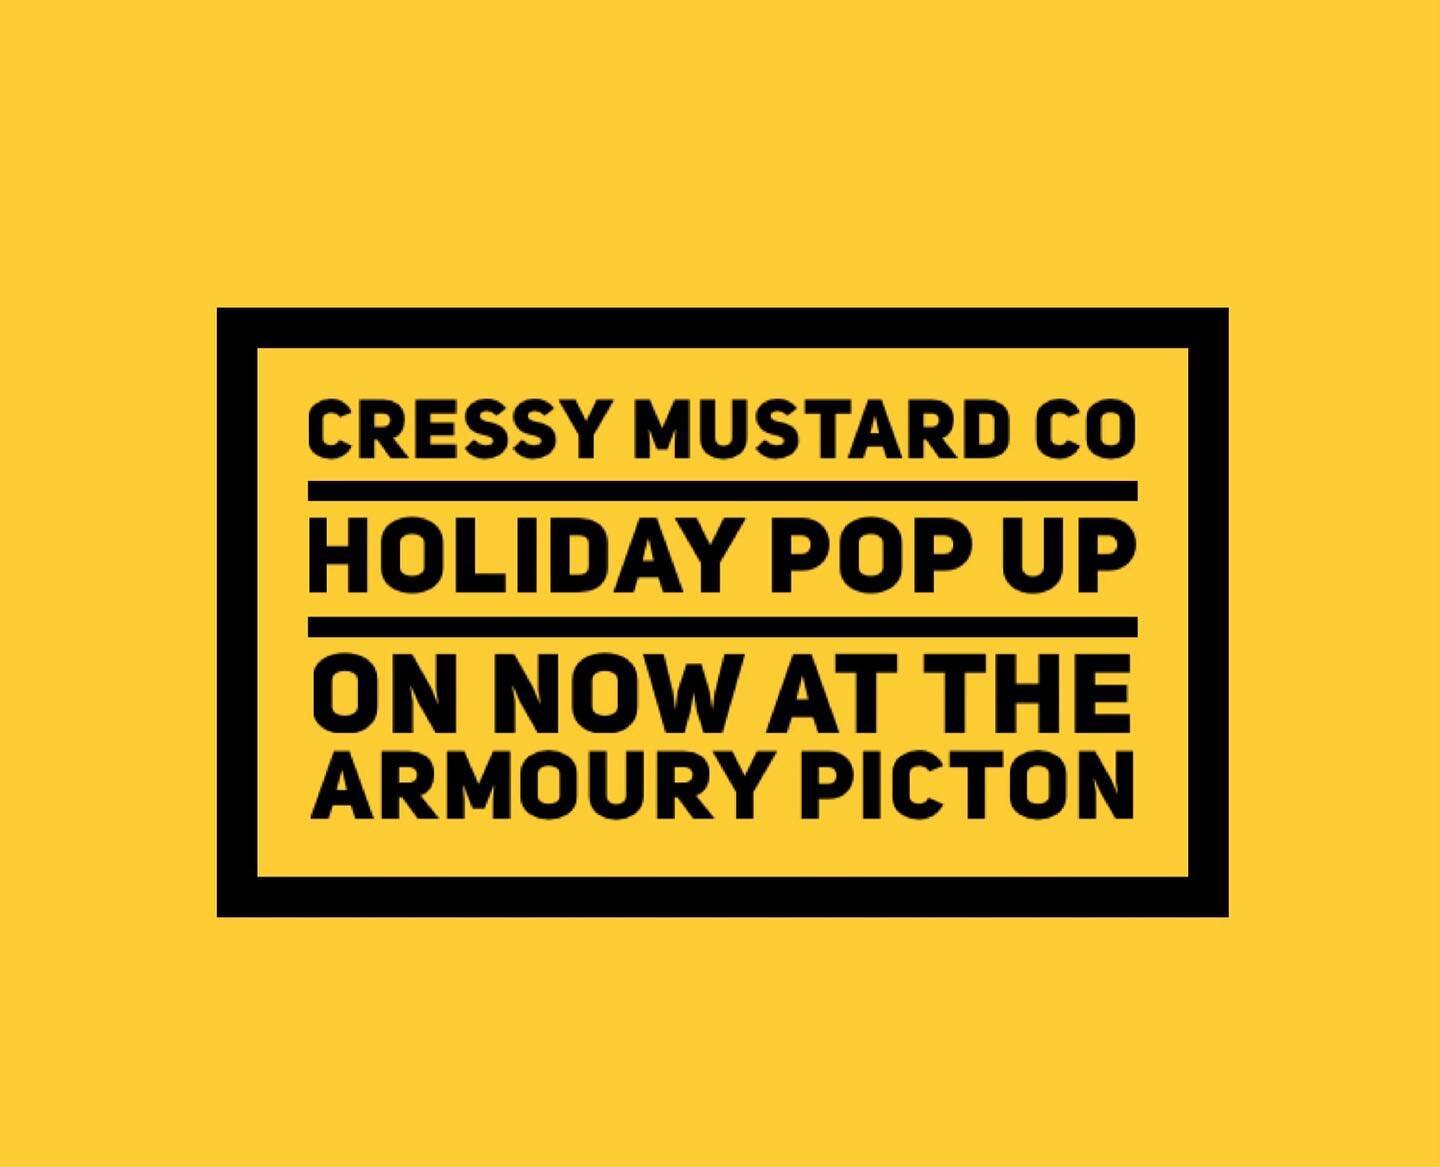 ✨ CRESSY MUSTARD HOLIDAY POP UP✨

Picton! We&rsquo;ve arrived with all ur mustard faves &amp; more☺️

- Holiday special 3 for $25 mustards (hello stocking stuffers)

- Imported Oaxacan glass 

- Sun dried, hand picked Oaxacan coffee by the pound

- P